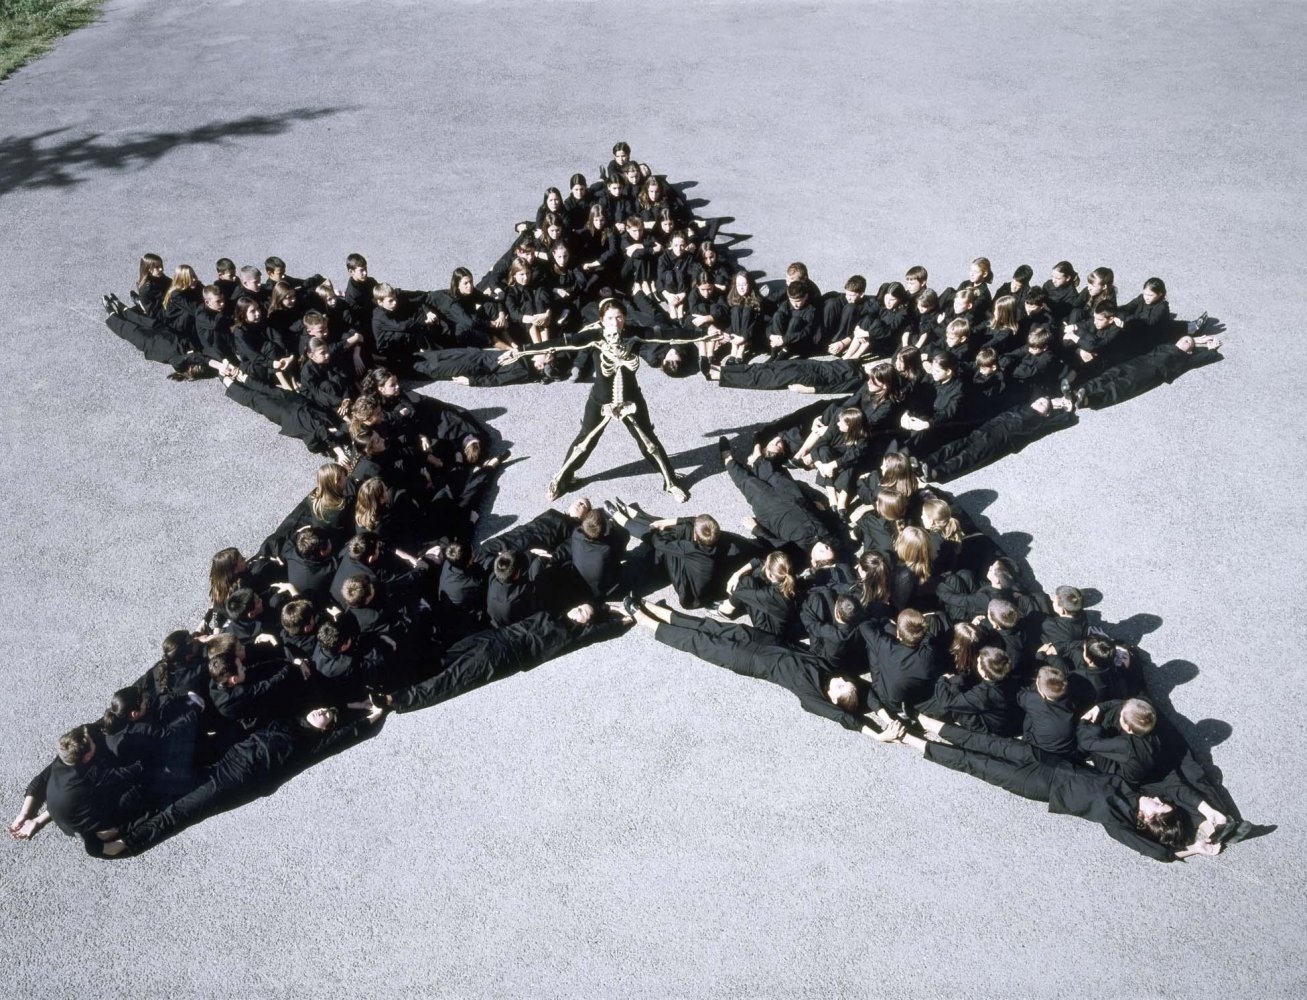 Marina Abramović, Count on Us (Star) [1 screen projection], 2003, 1 screen projection, dimensions variable.